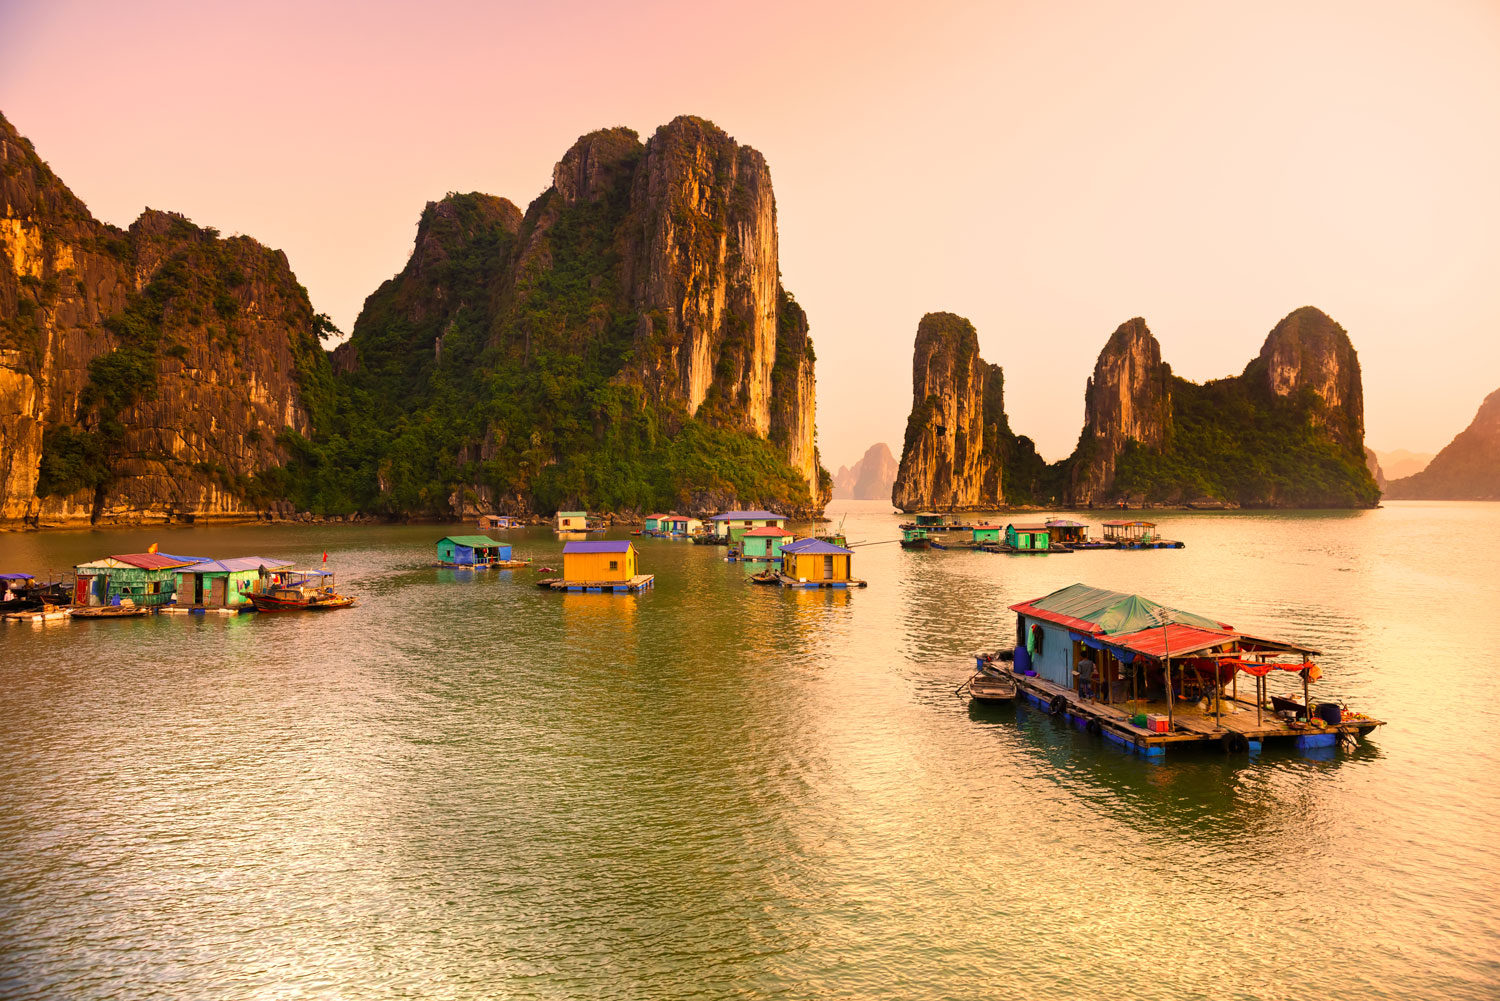 Halong Bay - a must-visit destination for any first-timer in Vietnam.